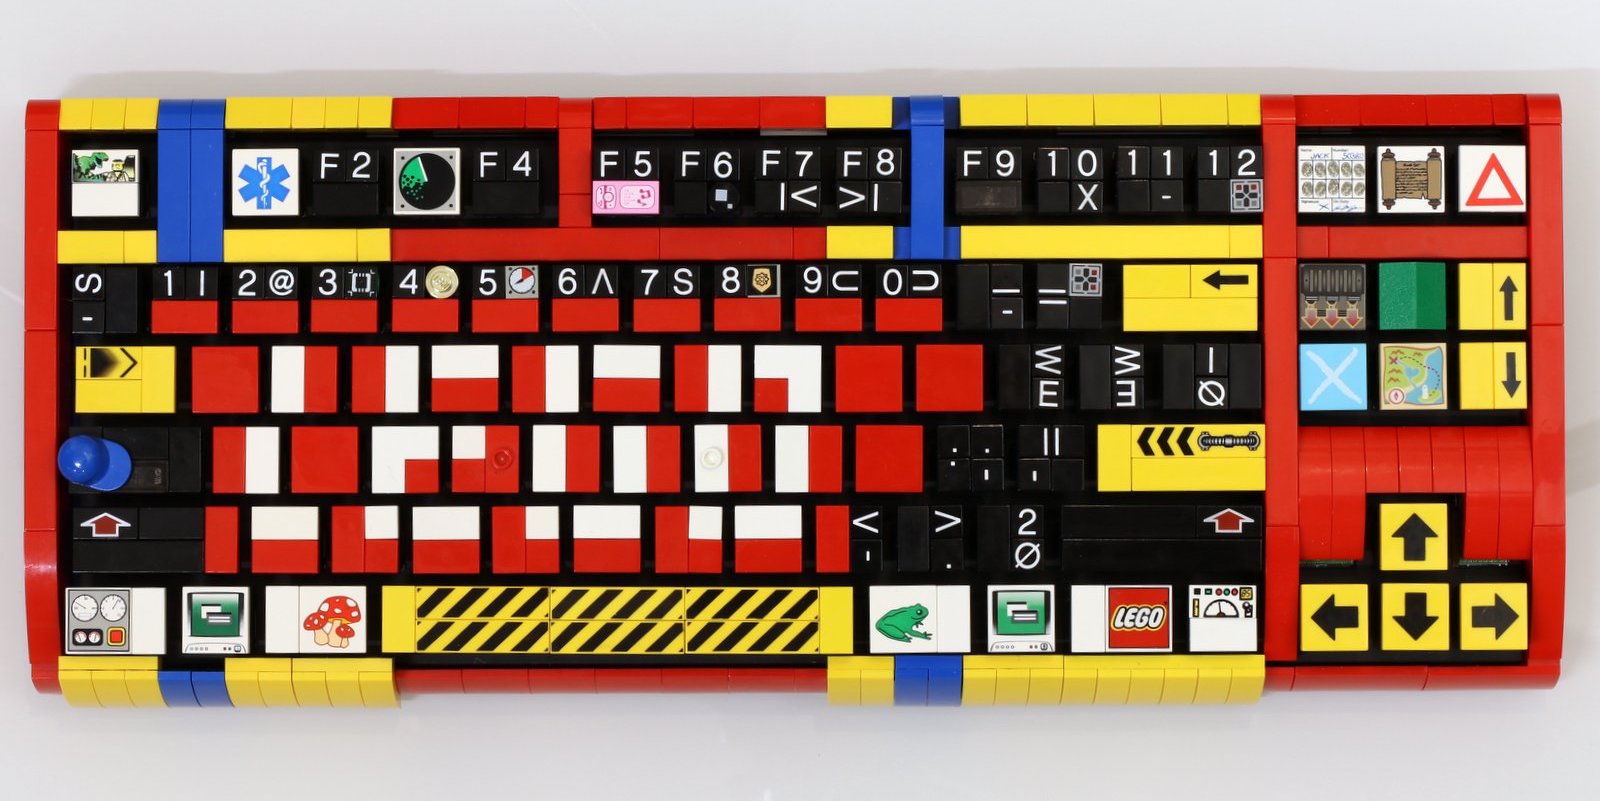 aktivitet Alexander Graham Bell Supersonic hastighed Here's how to make your very own customized LEGO mechanical keyboard